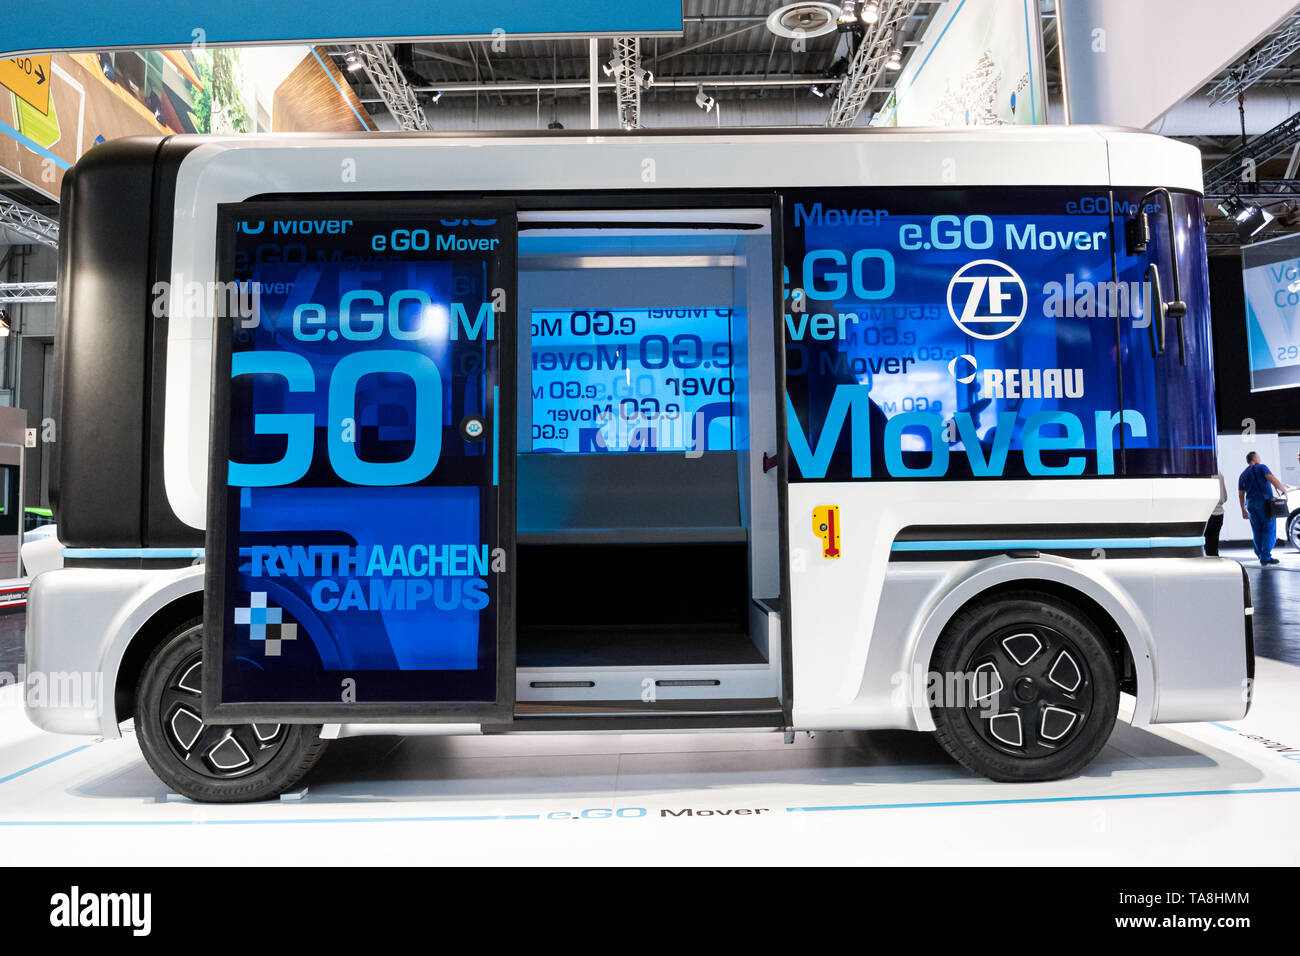 Hannover, Germany. 11th June, 2018. e.GO Mover, multi-purpose fully electric, connected and automated shuttle minibus developed by e.Go Moove GmbH (a joint venture of e.GO Mobile AG, Germany, and ZF Friedrichshafen AH, Germany) presented at CEBIT 2018, international computer expo and Europe's Business Festival for Innovation and Digitization. Credit: Christian Lademann Stock Photo